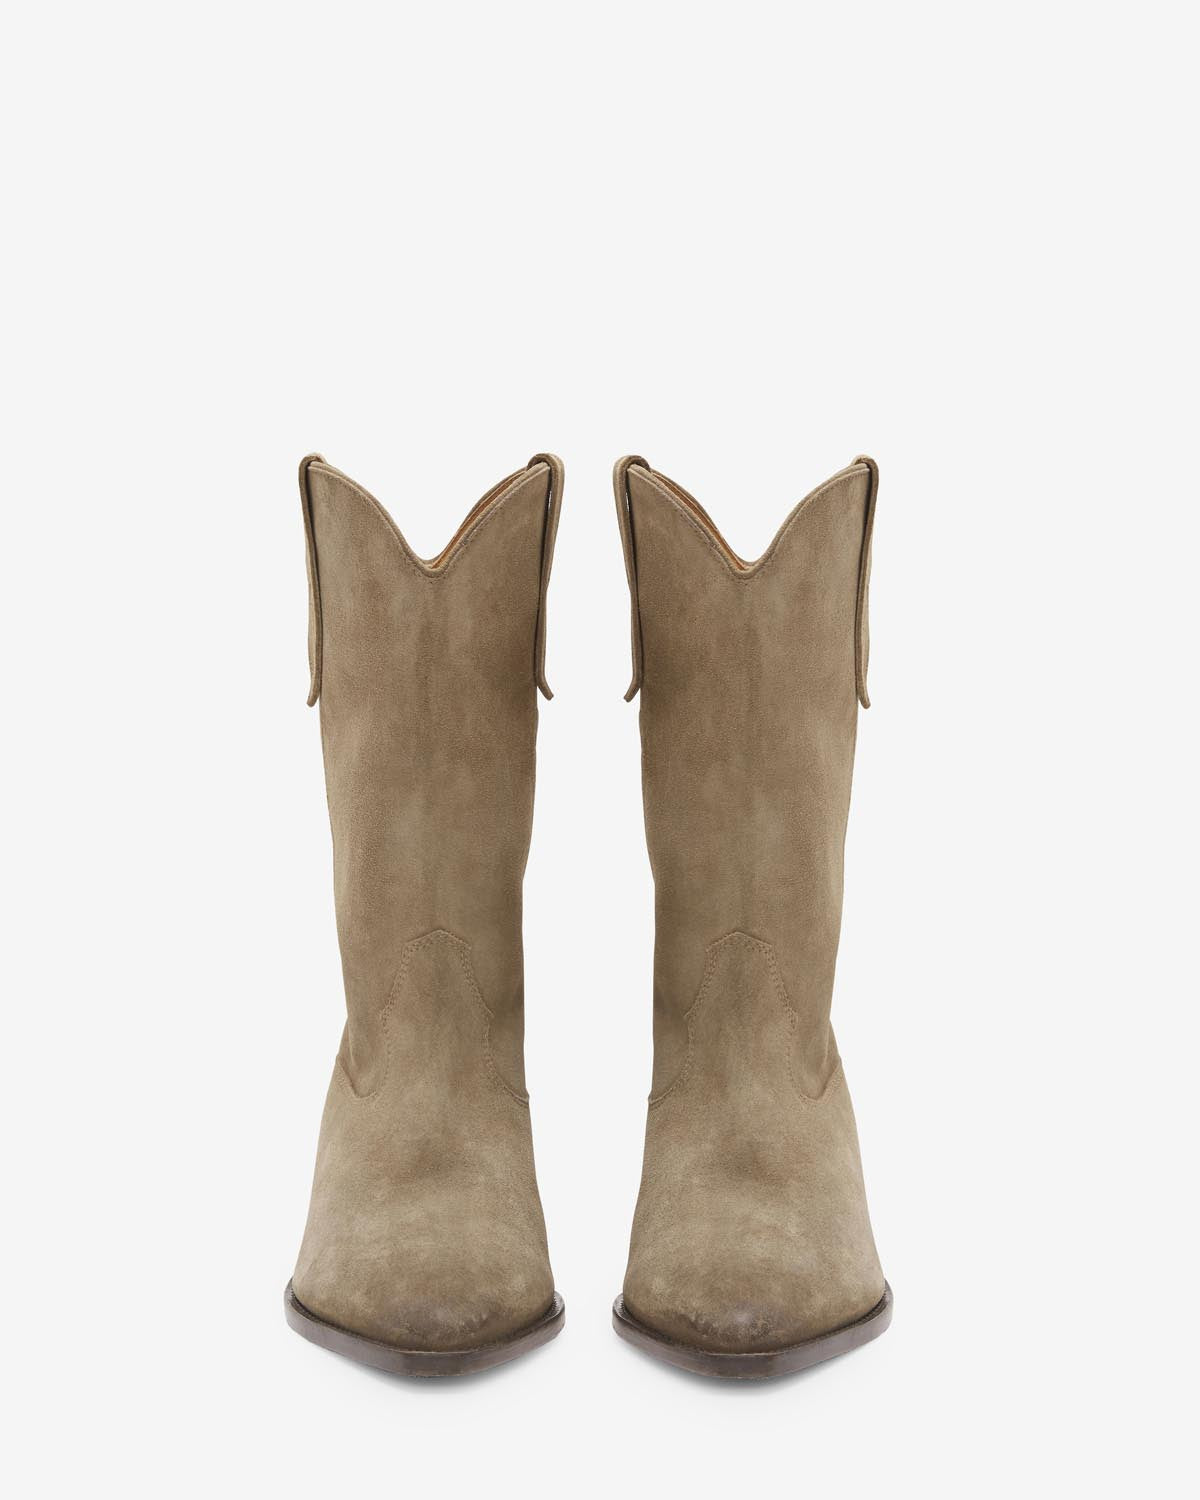 Duerto cowboy boots Woman Taupe 4